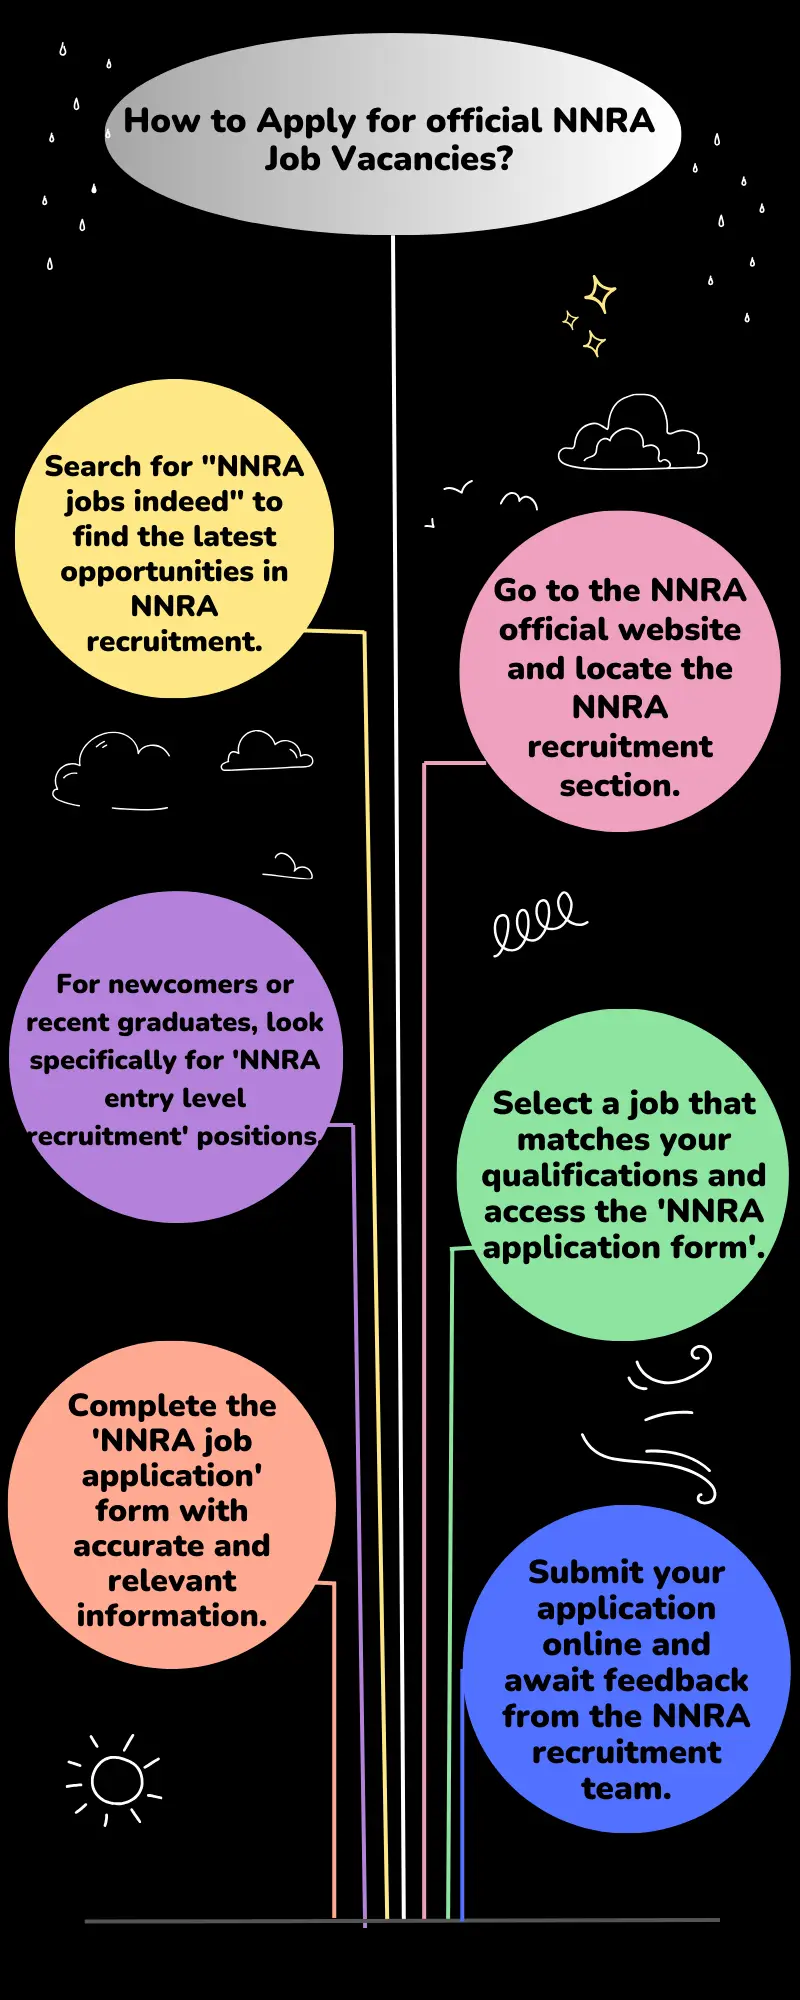 How to Apply for official NNRA Job Vacancies?